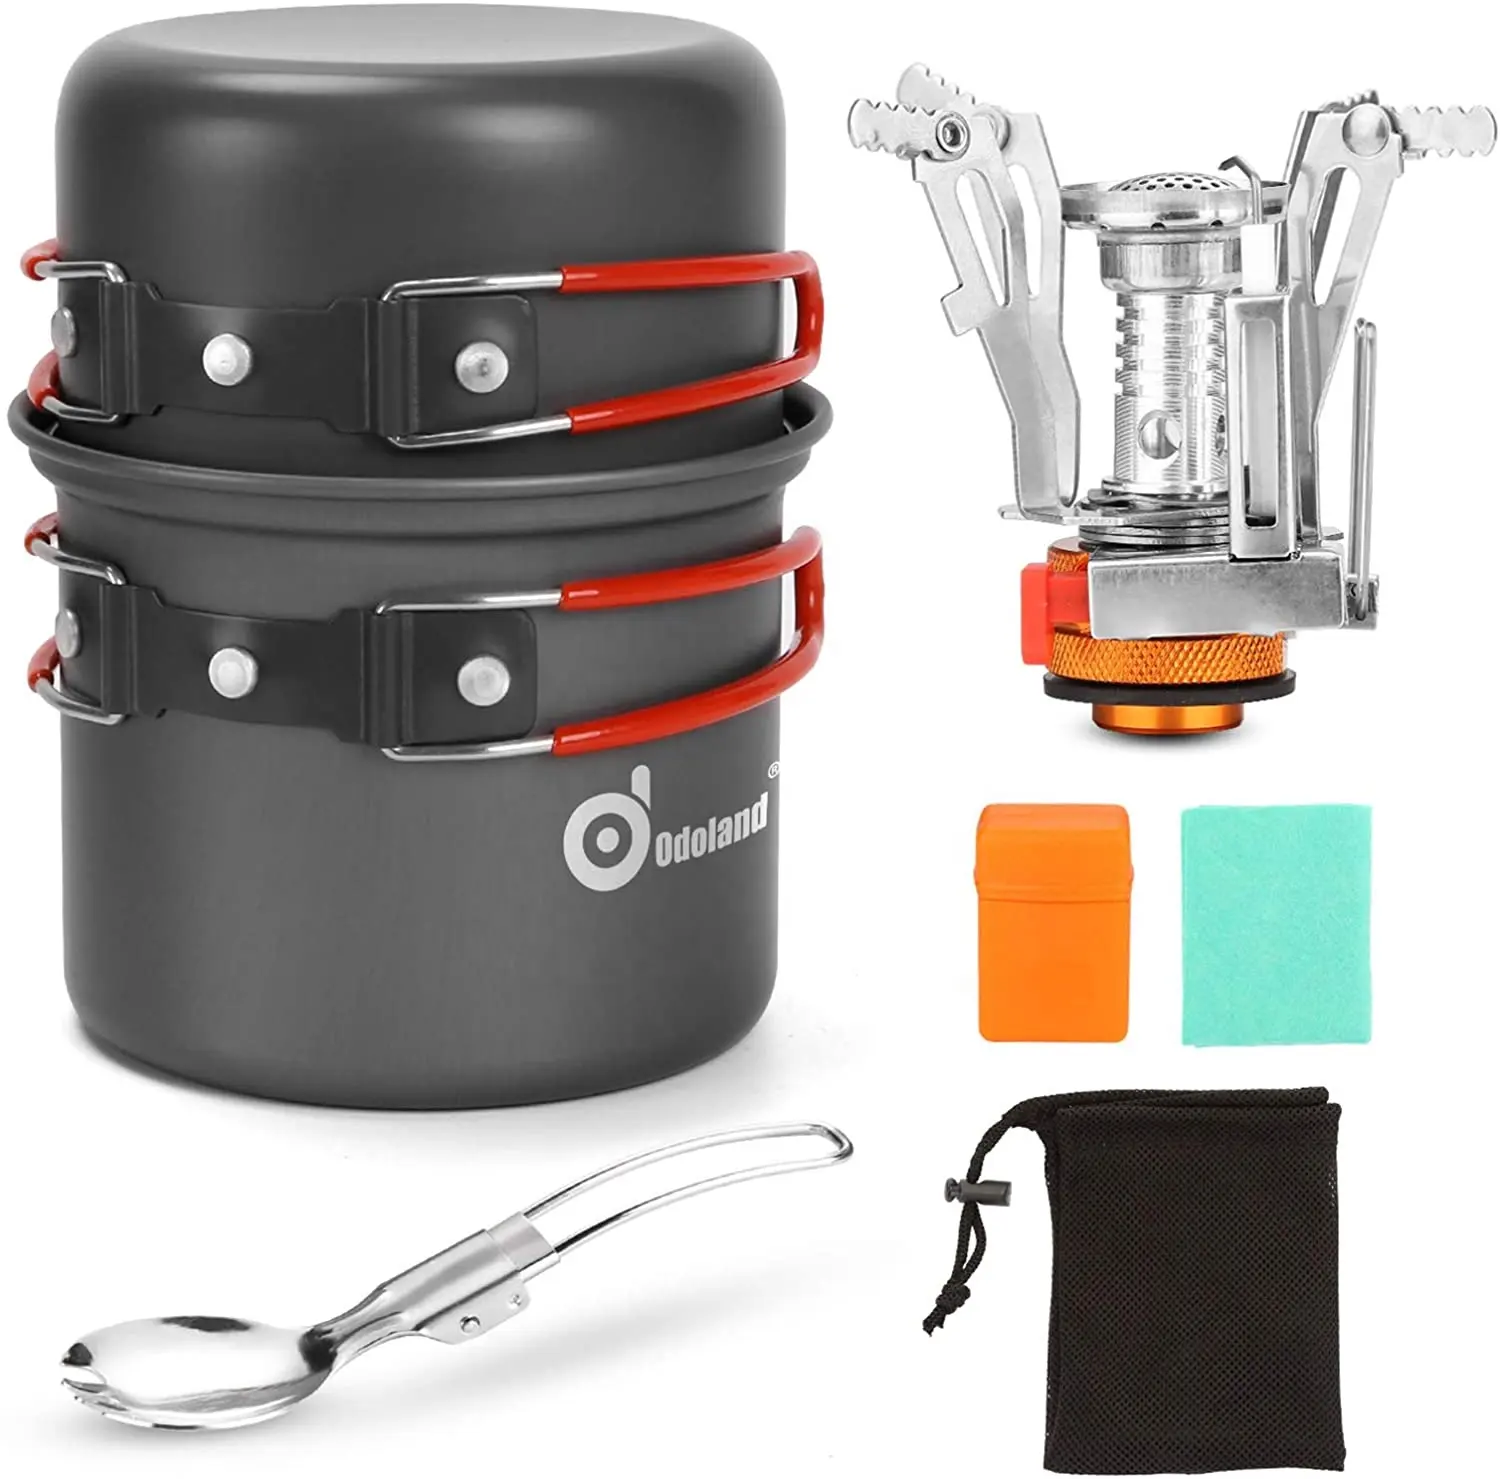 Camping Cookware Mess Kit with Lightweight Pot, Stove, Spork and Carry Mesh Bag, Great for Backpacking Outdoor Camping Hiking